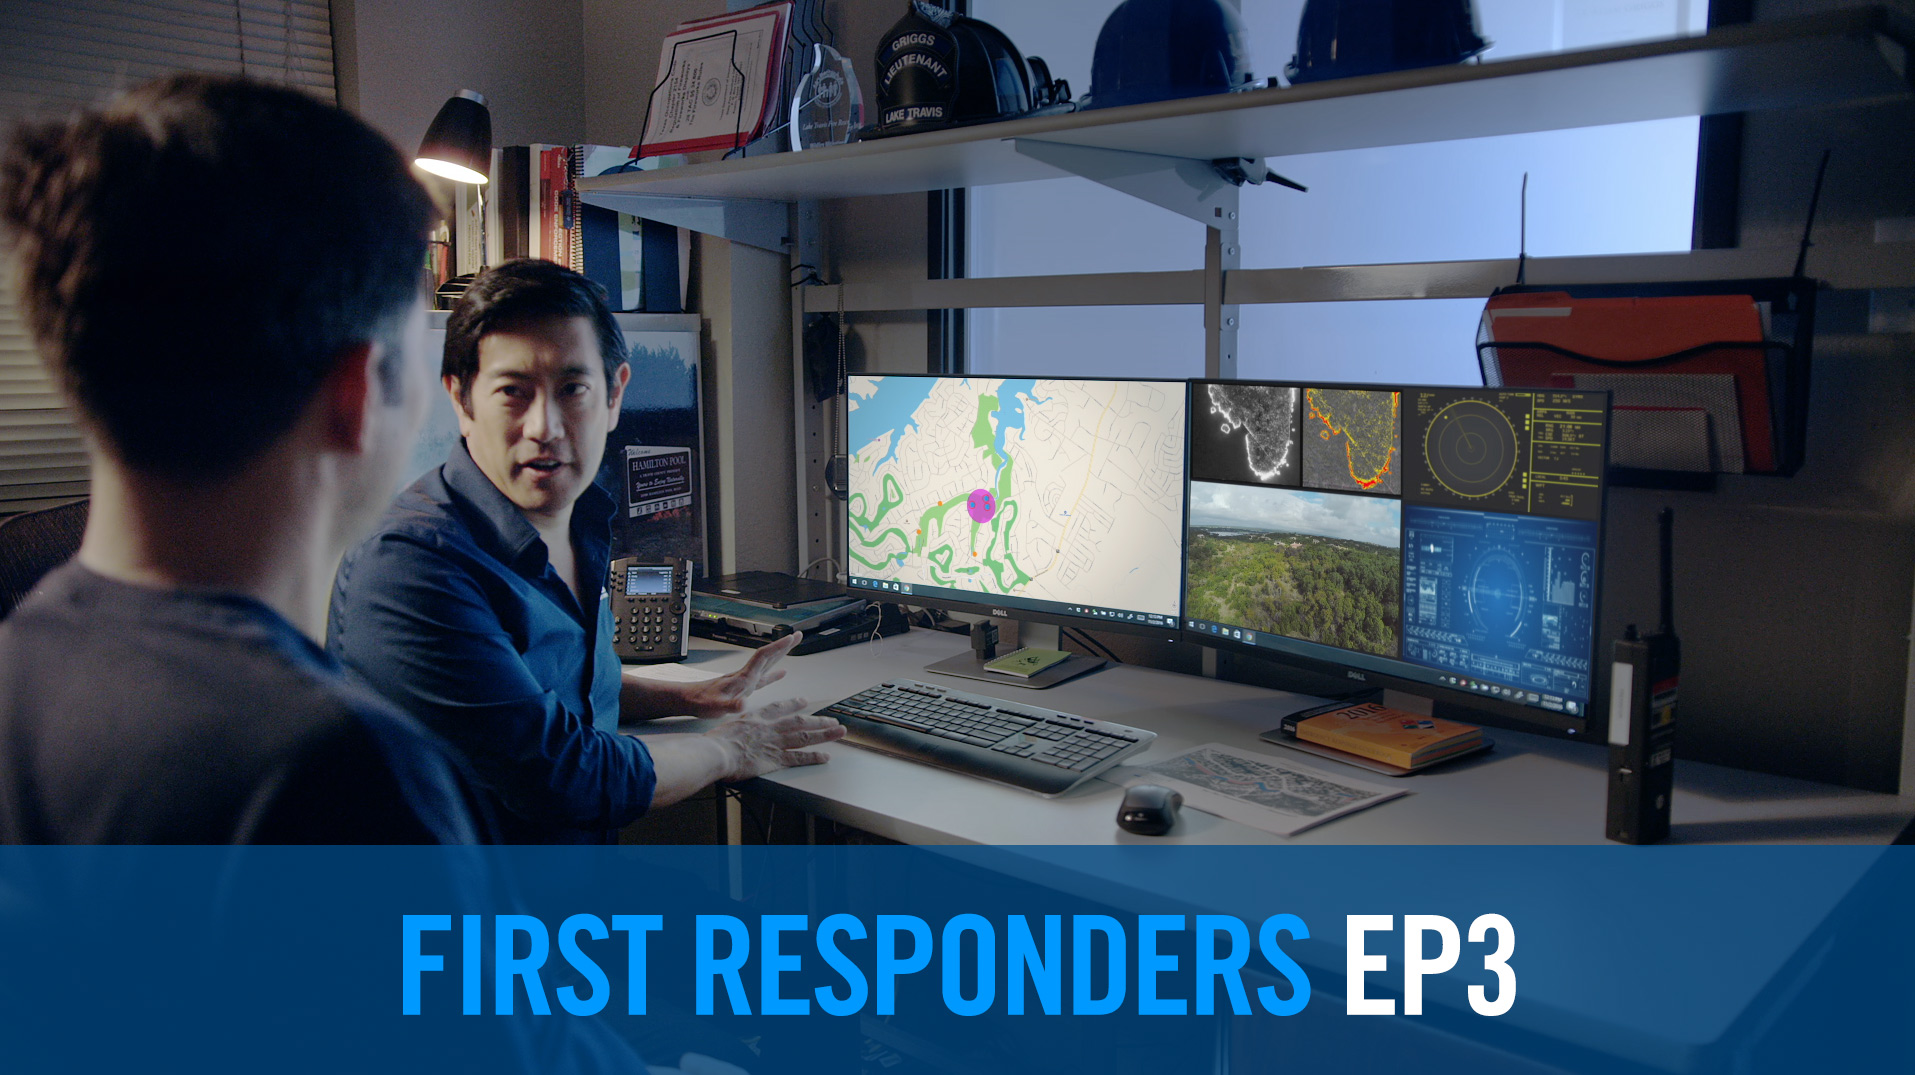 eit-project-first-responders-ep3-pr-overlay